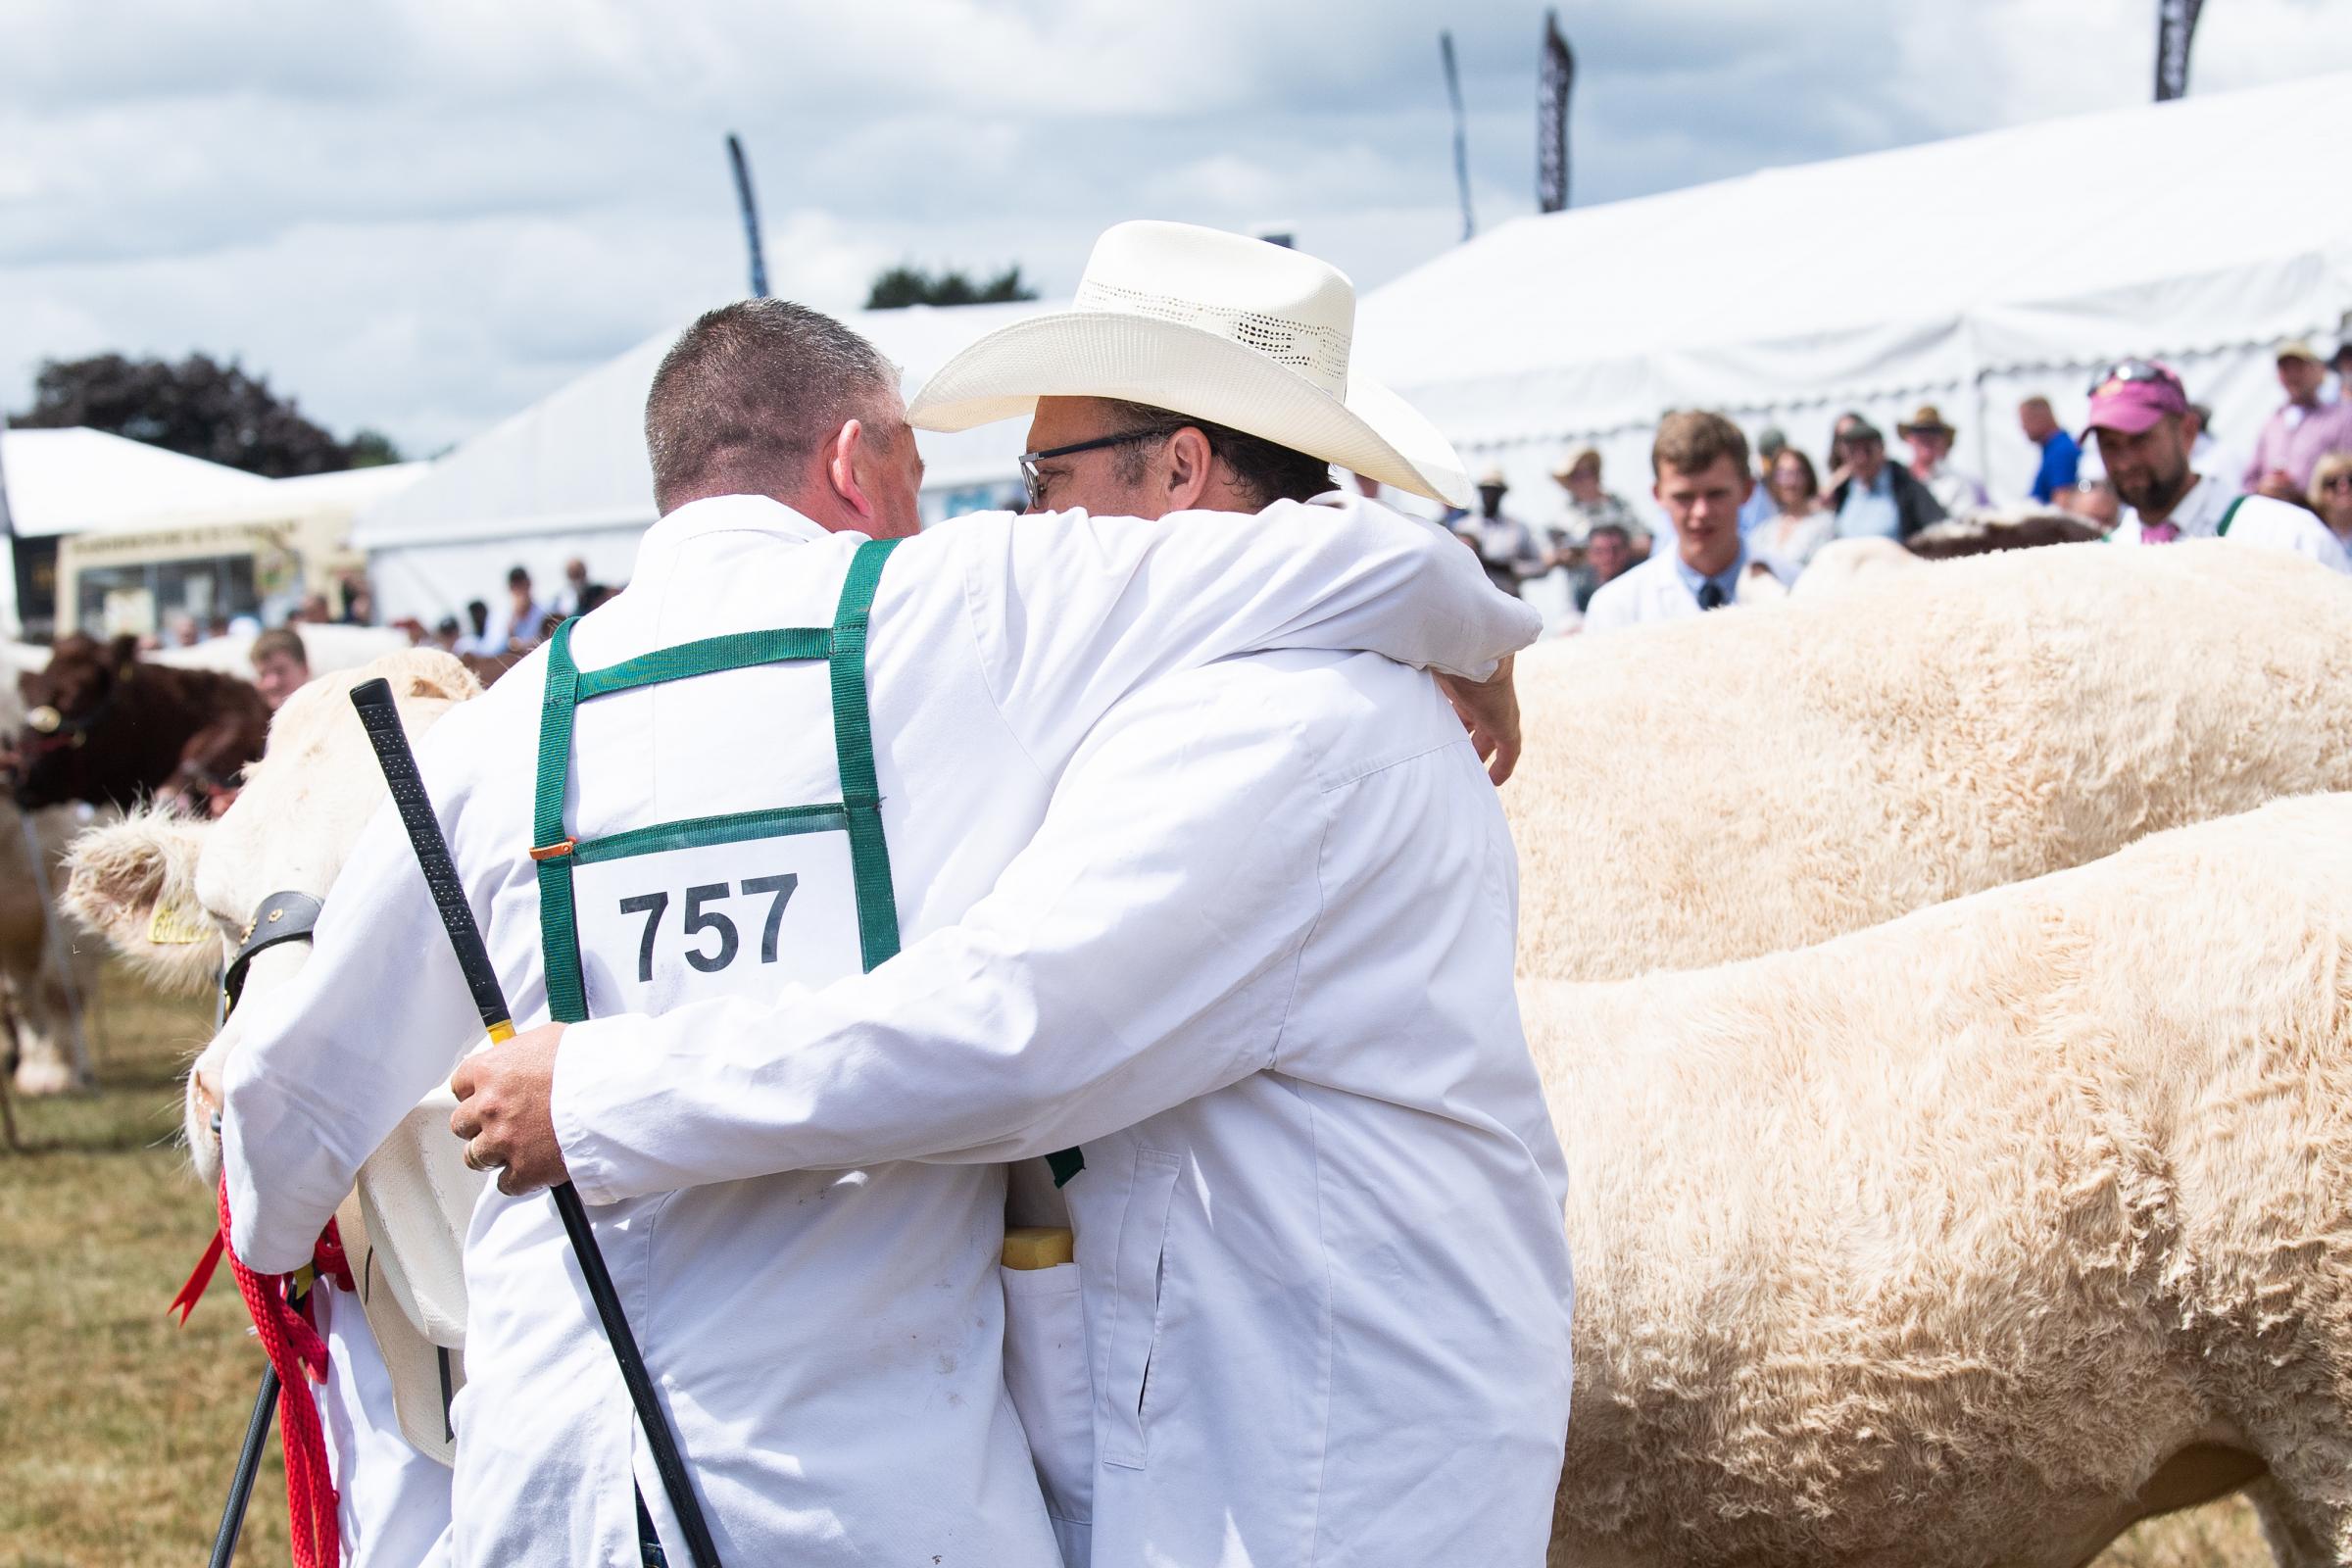 Steven OKane and Thor Atkinson celebrate winning the overall cattle with the Blonde, Brownhill Netta at the Great Yorkshire Show Ref:RH140722128  Rob Haining / The Scottish Farmer...